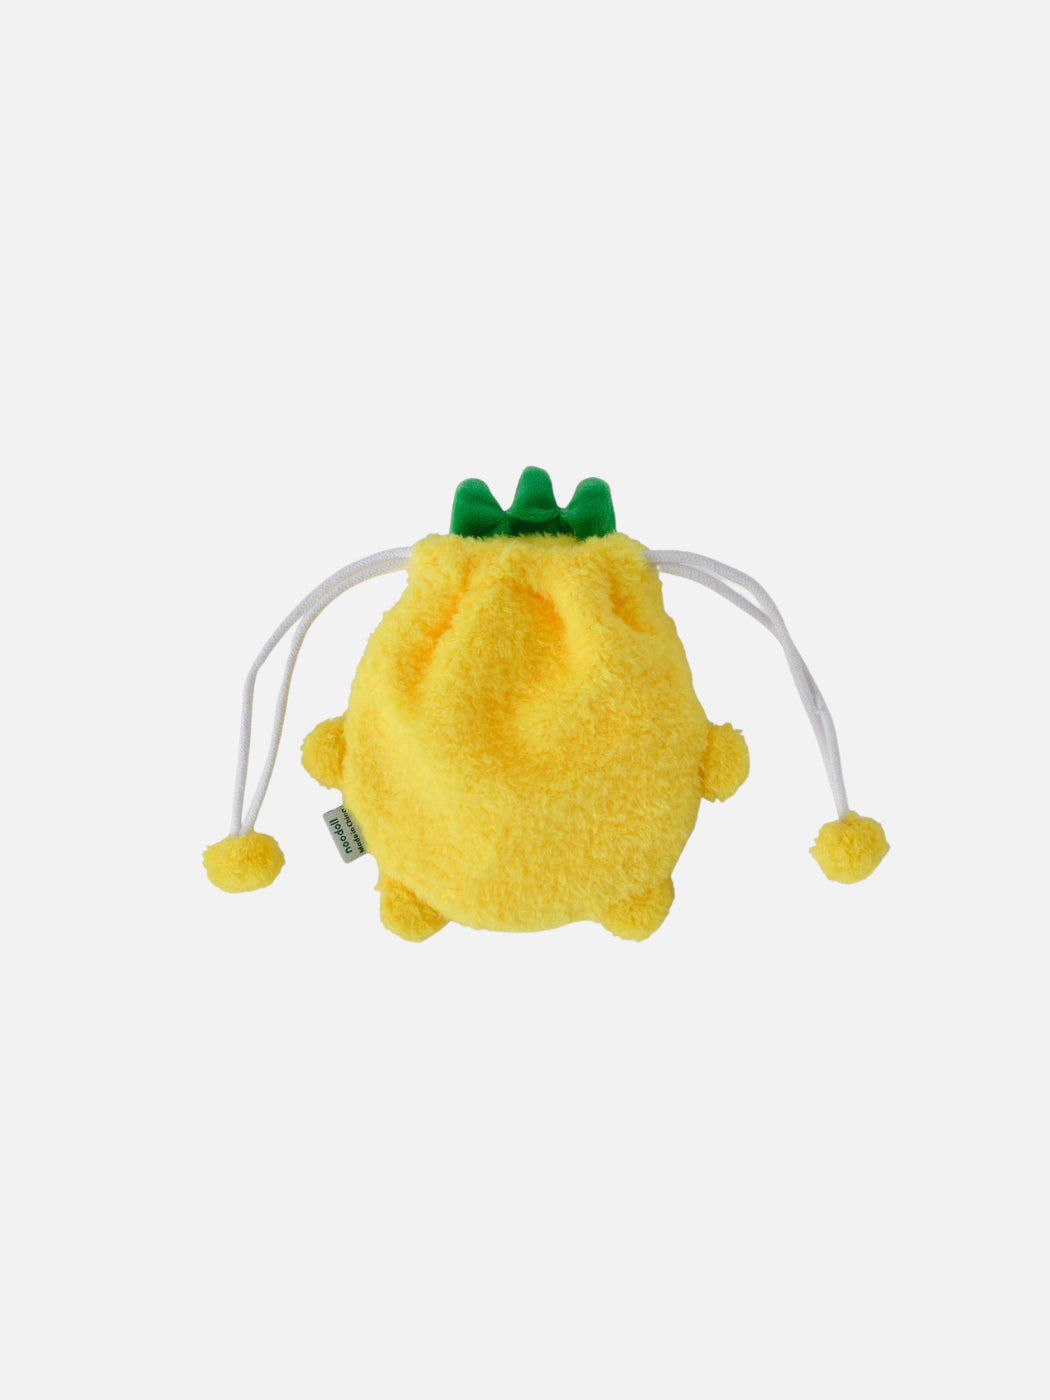 Drawstring Pouch - Riceananas Pineapple